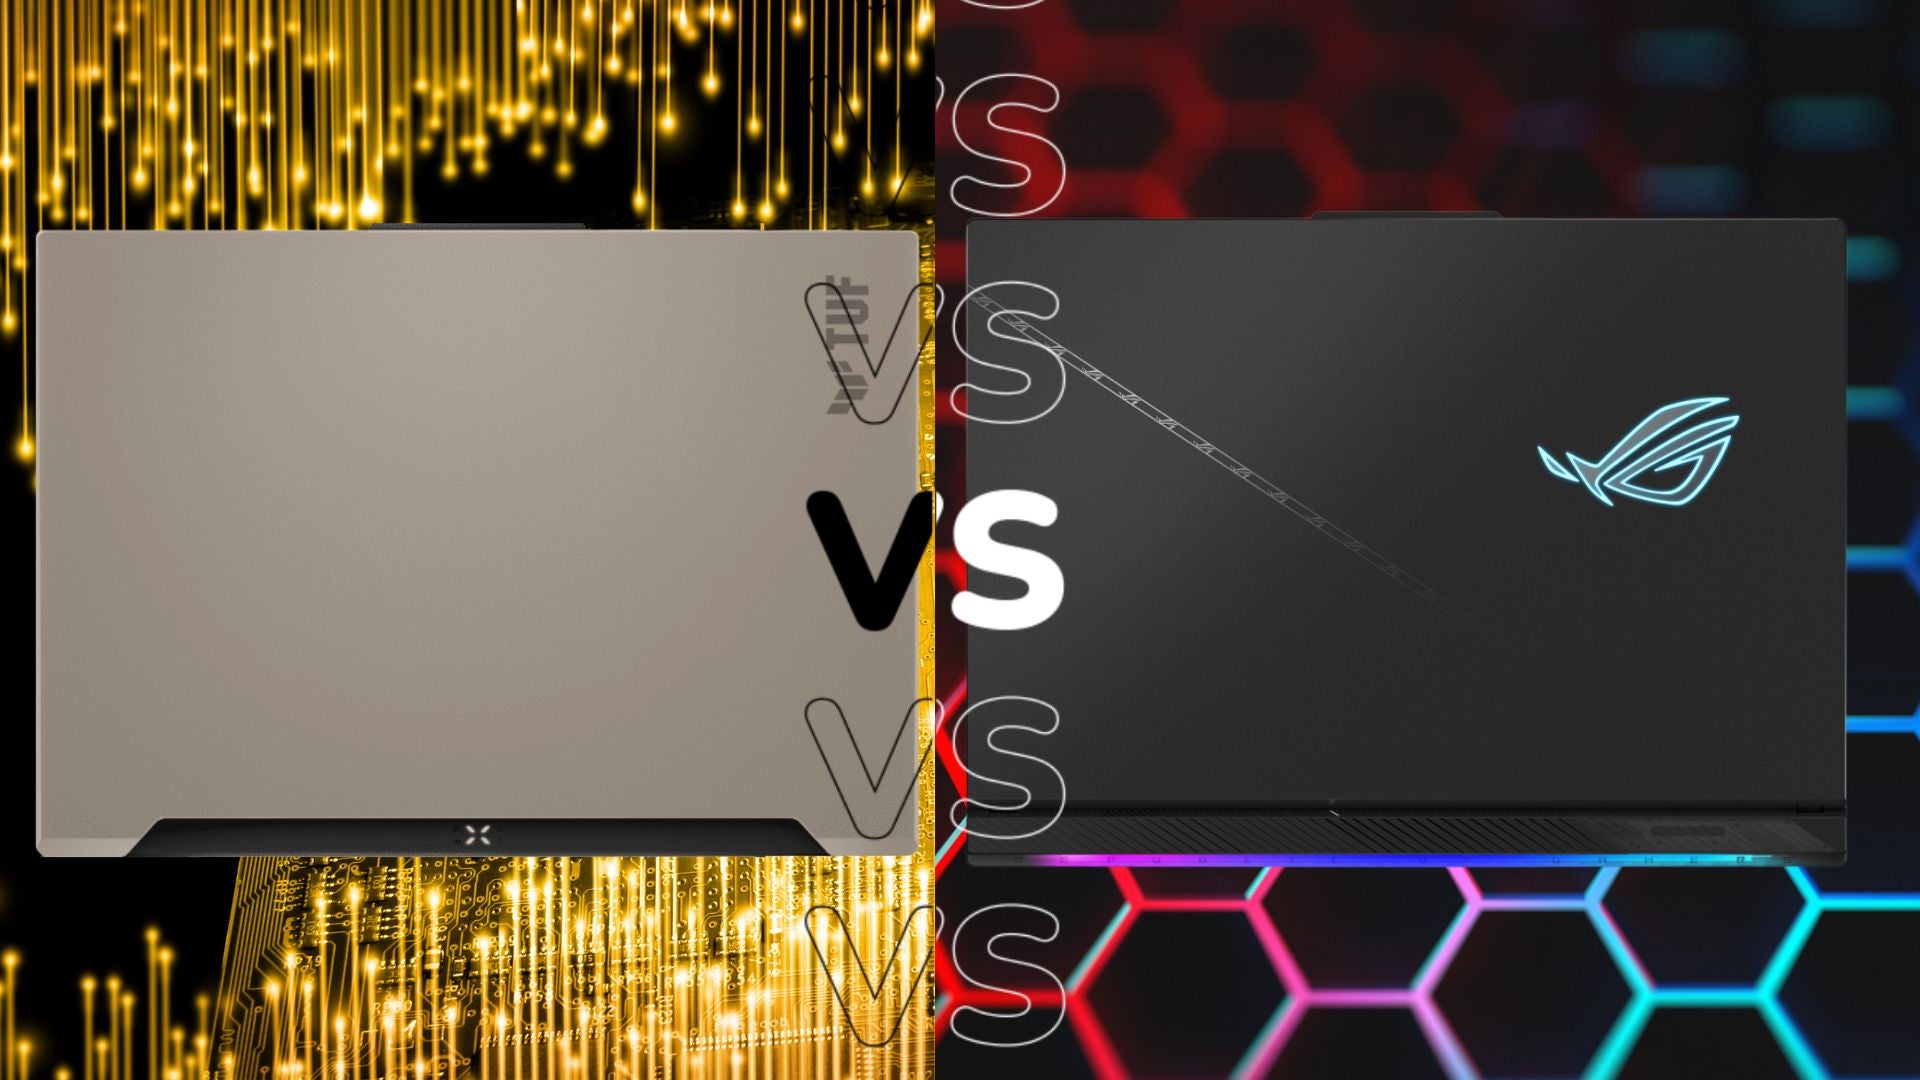 Asus ROG vs Asus TUF: What's the difference?